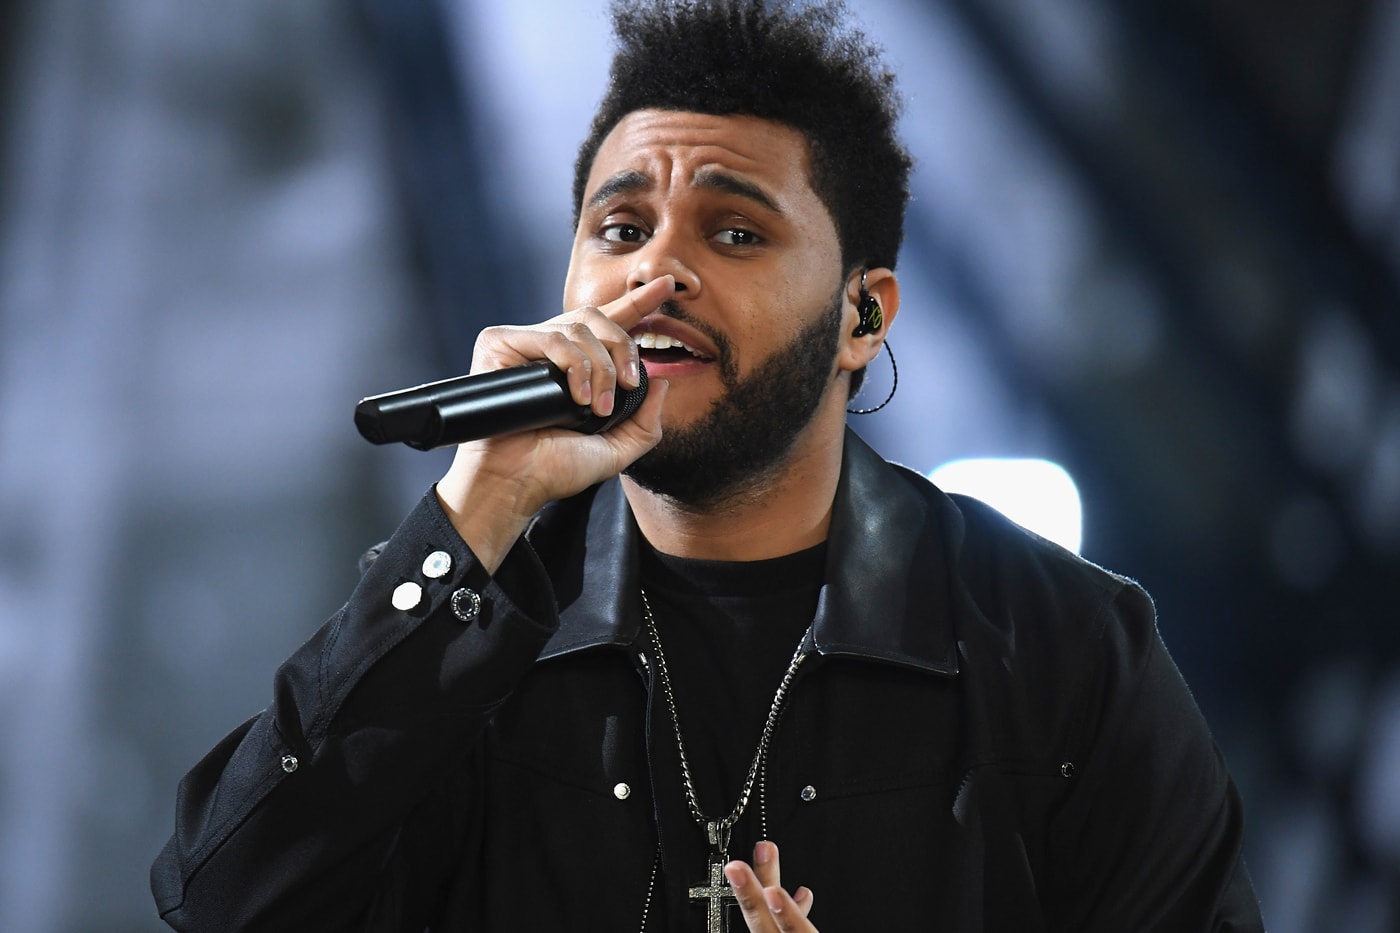 The Weeknd Releases New Song "Starboy" Featuring Daft Punk track apple music